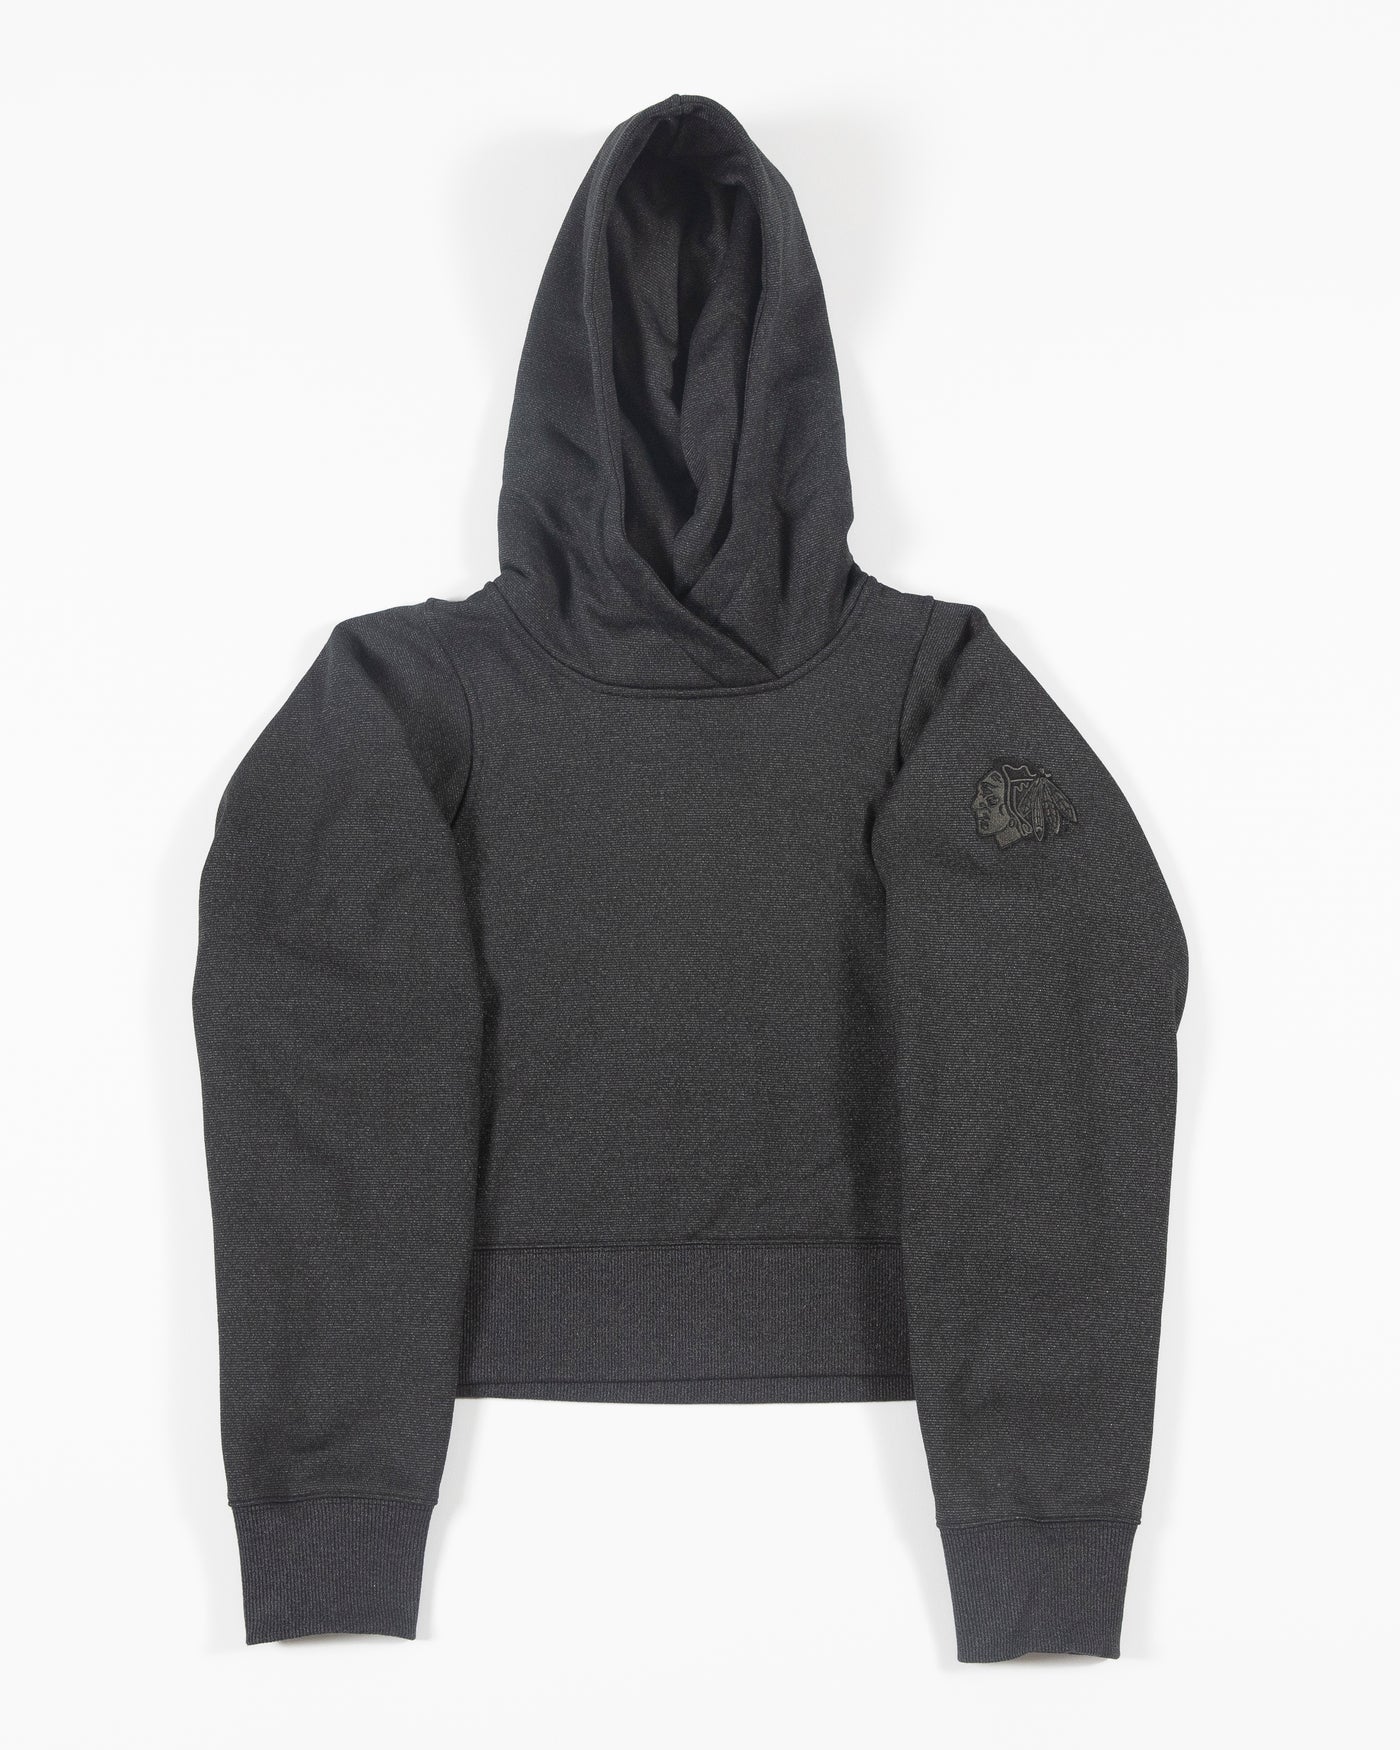 black cropped lululemon hoodie with tonal Chicago Blackhawks primary logo embroidered on left shoulder - front lay flat